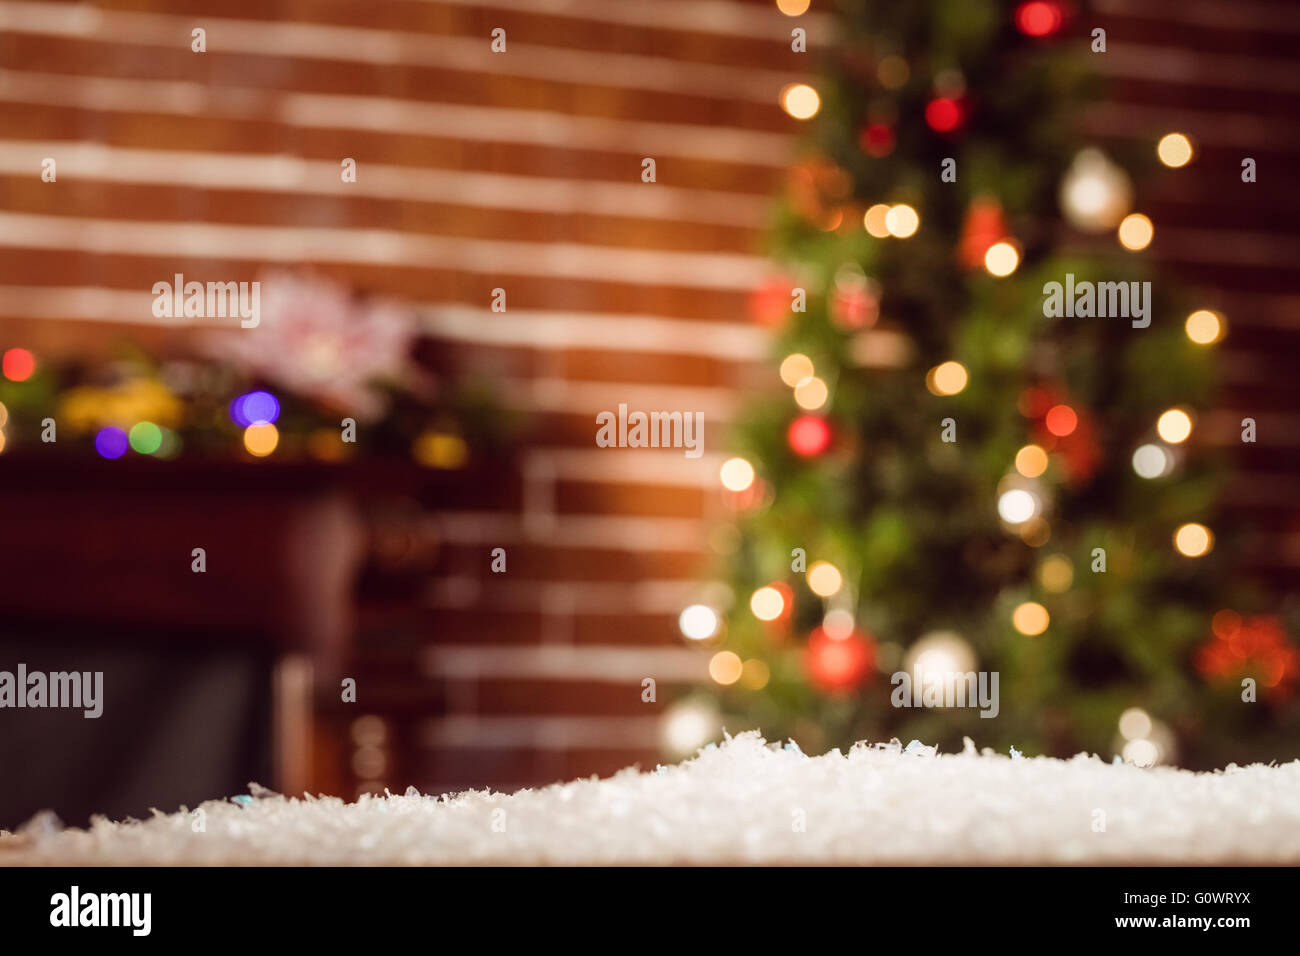 Composite image of room decorated at Christmas time Stock Photo